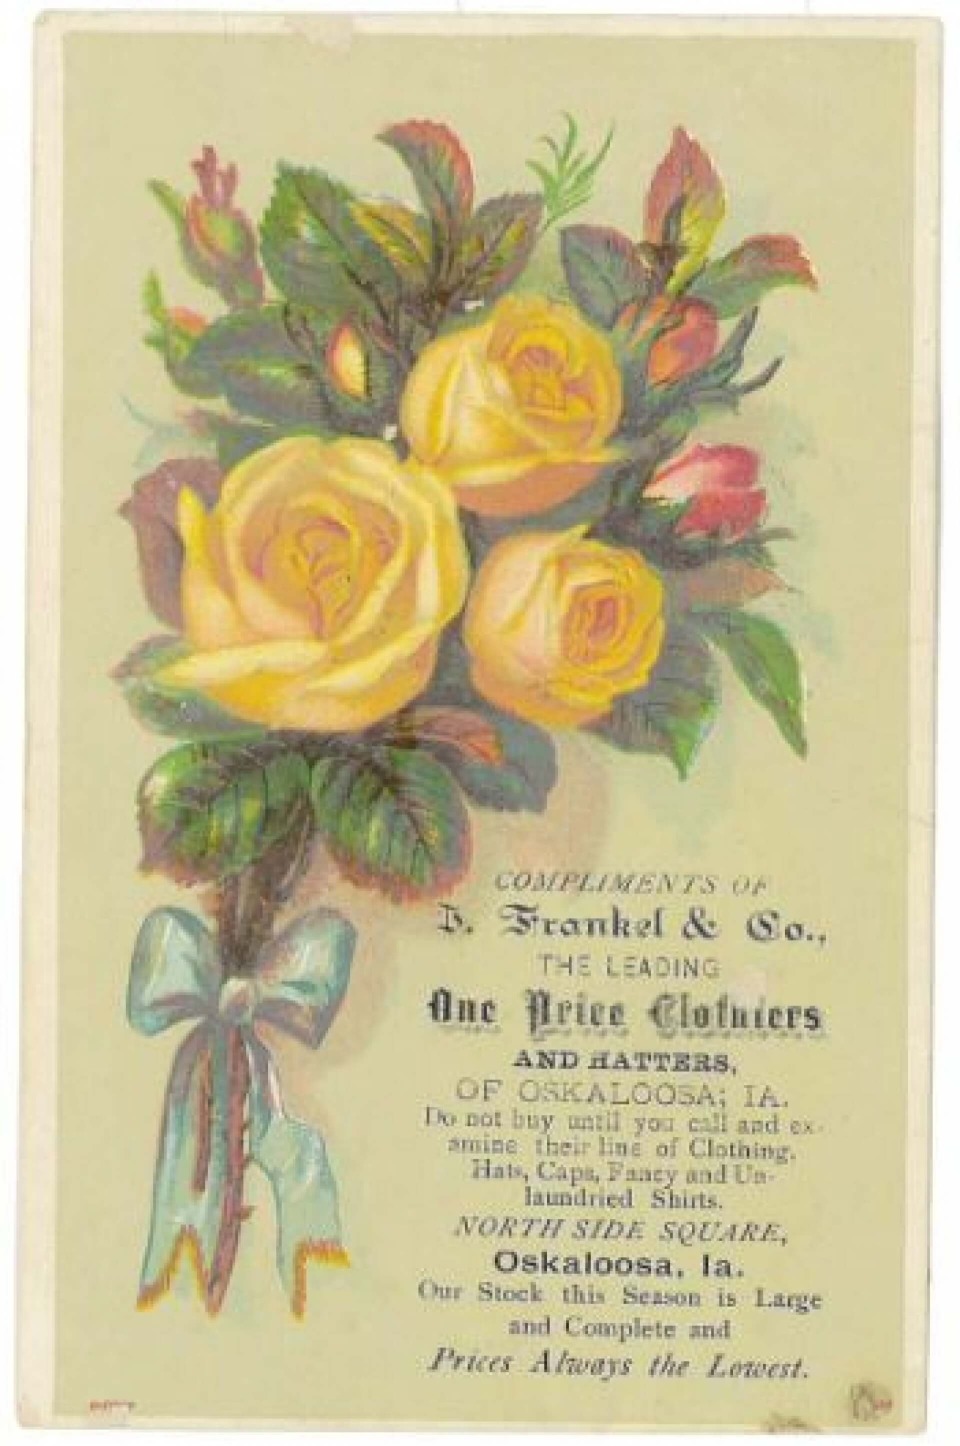 Floral business trade card: Compliments of I. Frankel & Co., the leading one price clothiers and hatters, of Oskaloosa; IA